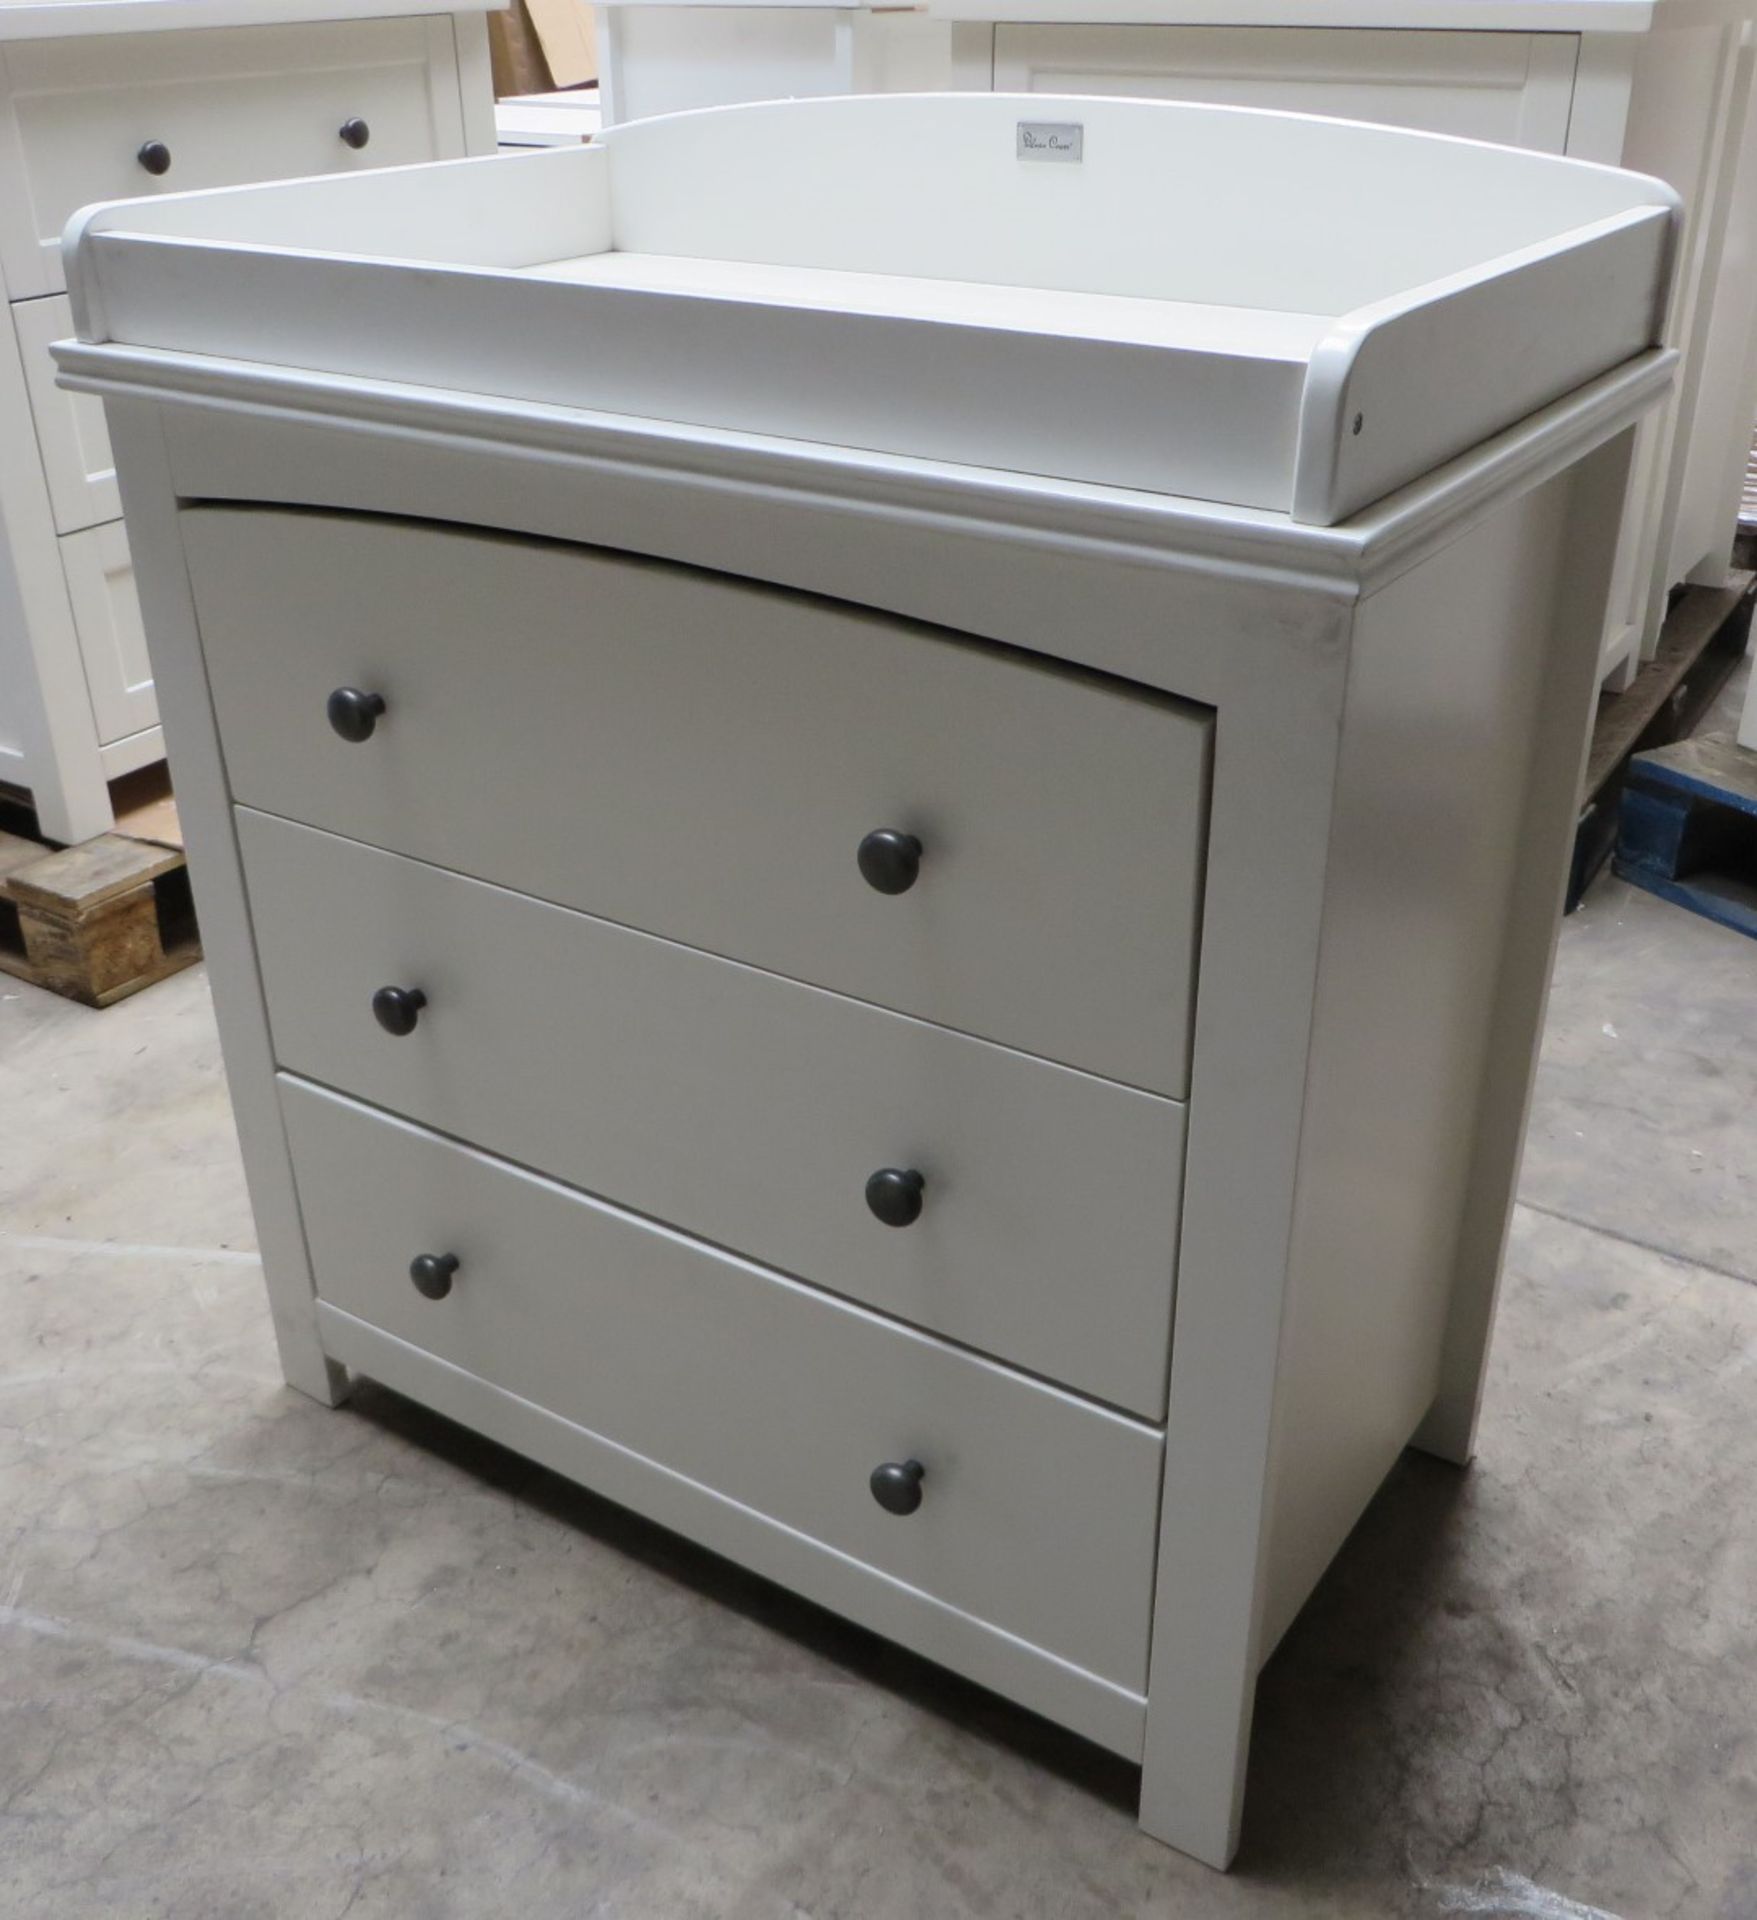 1 x Silver Cross Ashby-Style Combination Changer And Dresser - Nursery Furniture - 88x52x97.5cm - - Image 7 of 19